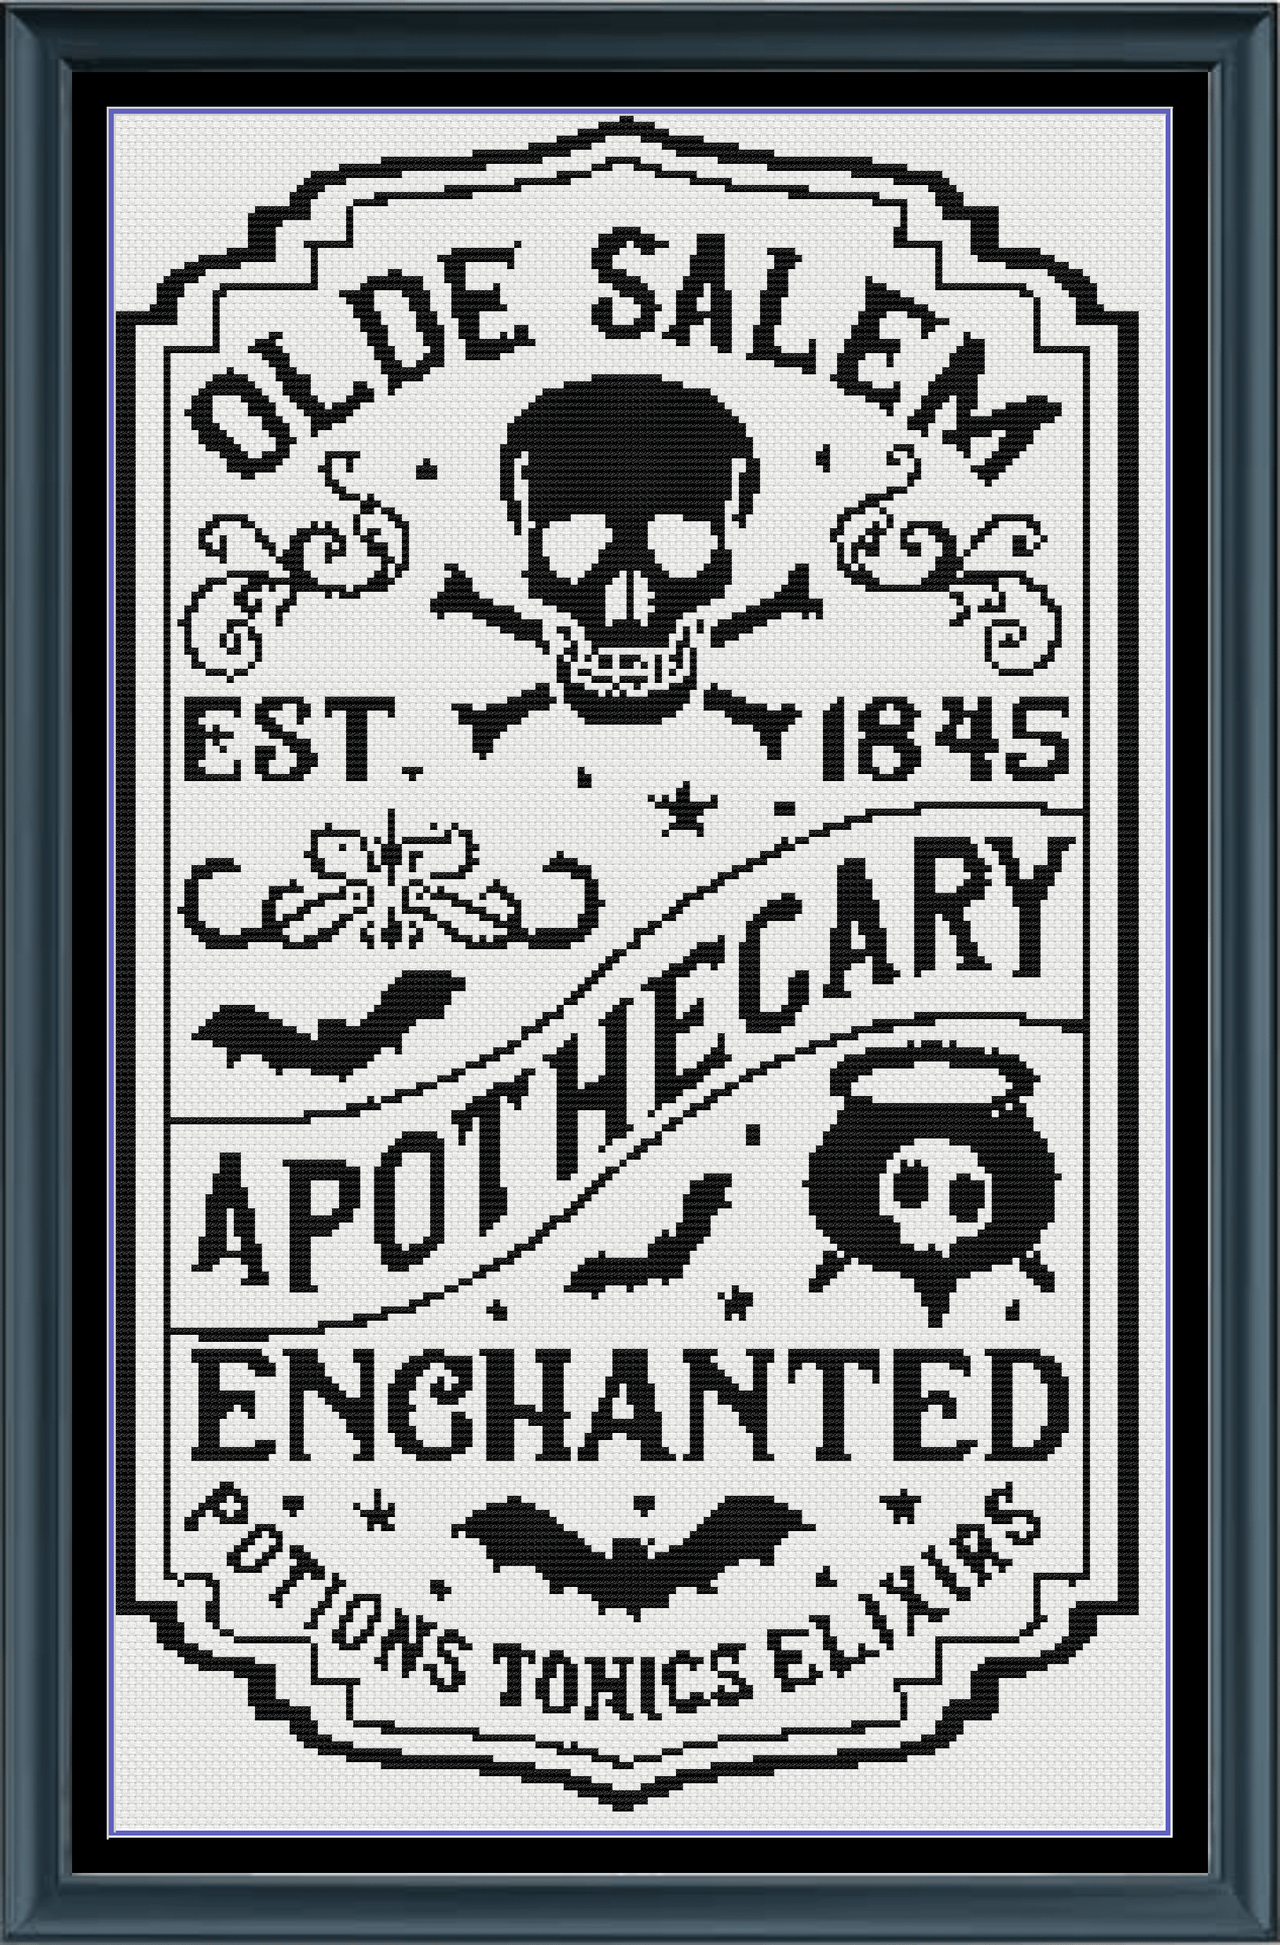 Stitching Jules Design Cross Stitch Pattern Vintage Apothecary Shop Sign Medium Monochrome Counted Cross-Stitch Pattern | Instant Download PDF